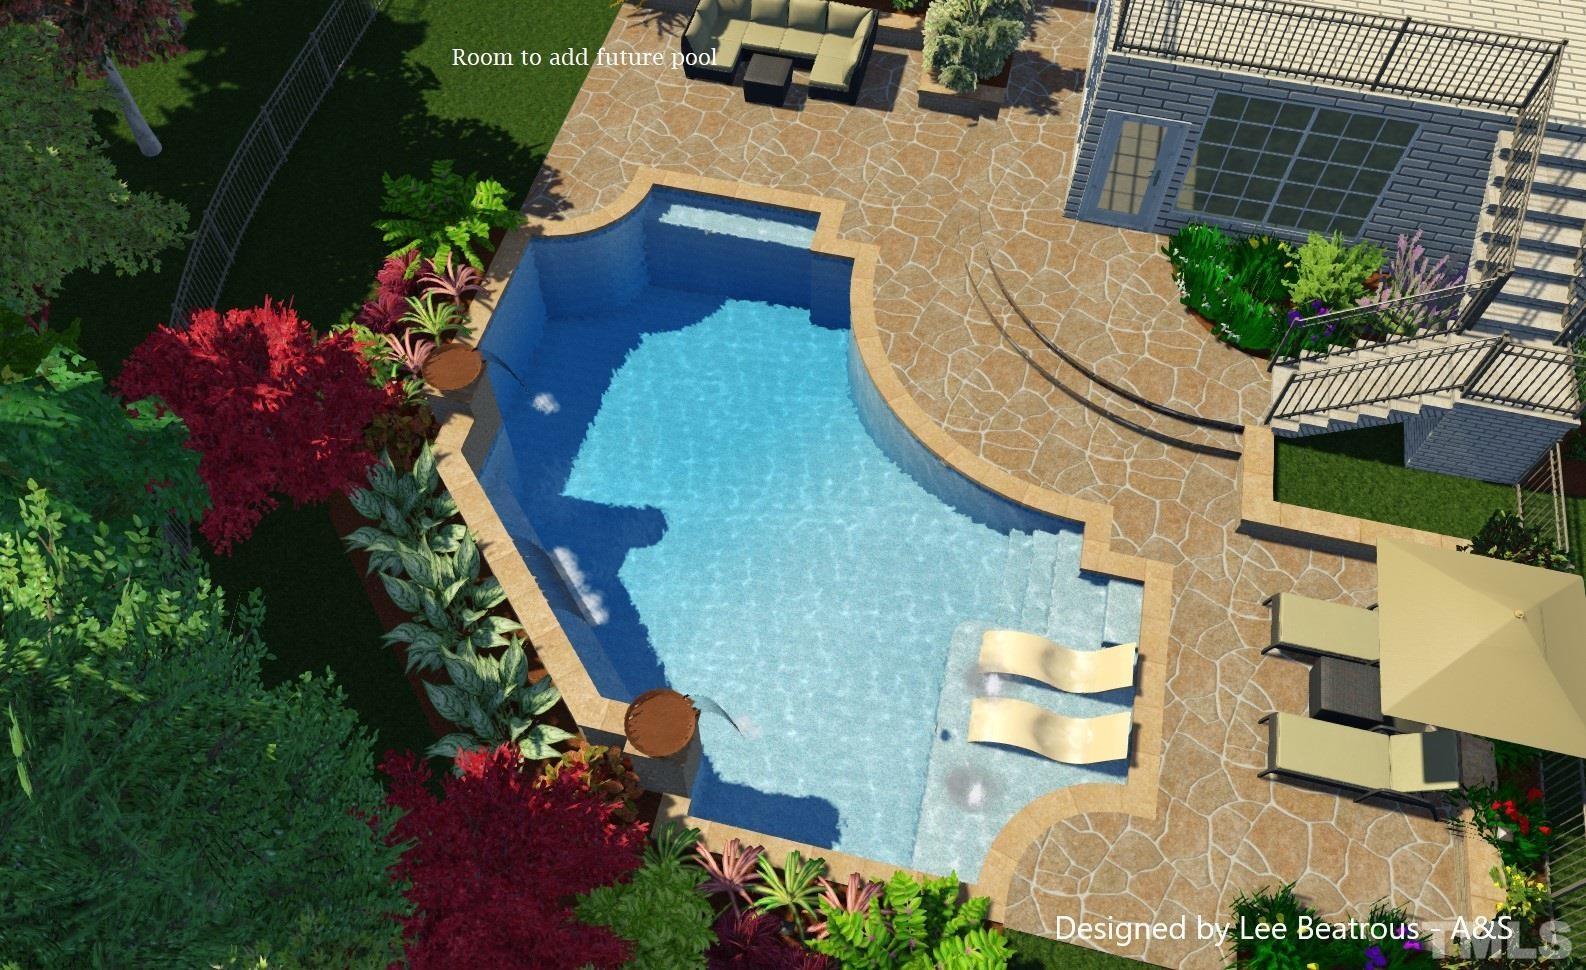 Room for a pool. Future Pool rendering